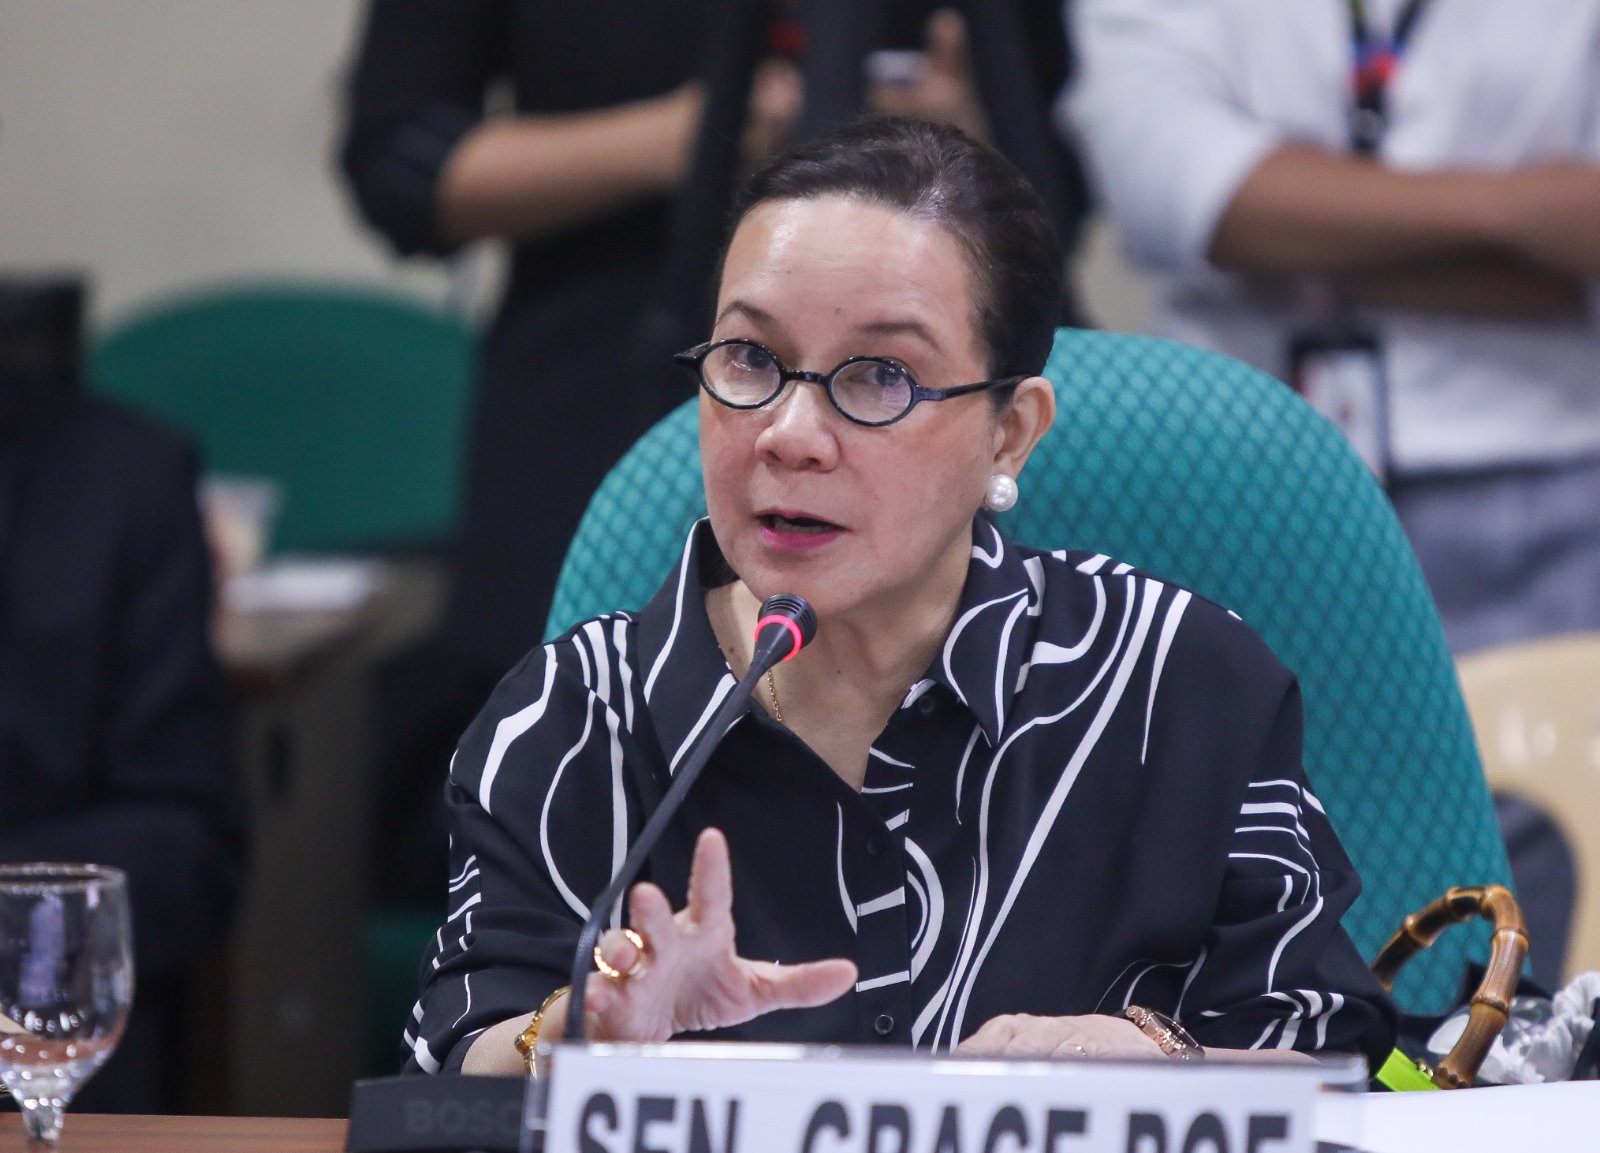 poe thanks media for covering ‘dry’ hearing